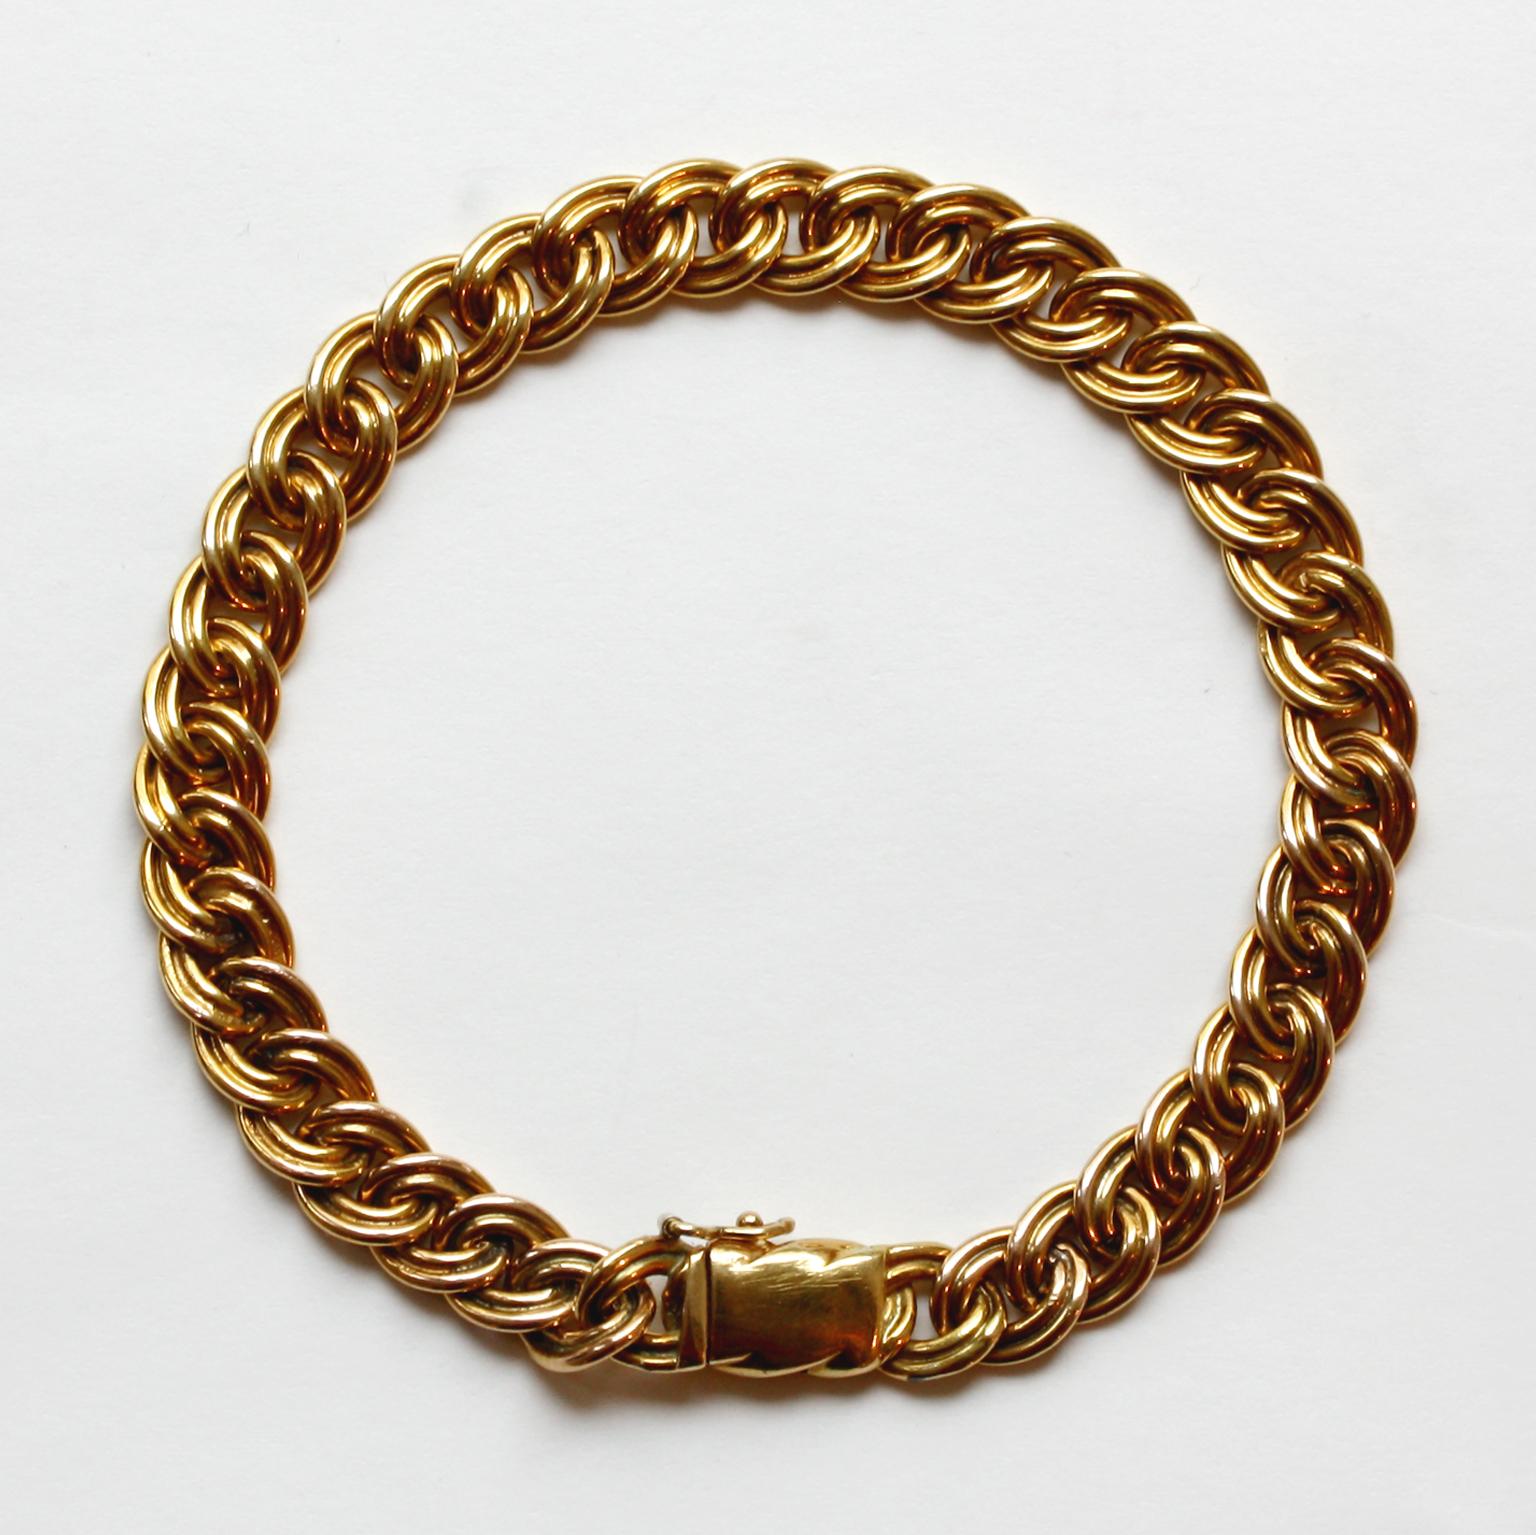 An 18 carat gold bracelet with flat double oval links, with an invisible lock and safety lock, Dutch, circa 1910.

length: 18.8 cm suitable for a wrist from 16 – 18 cm
weight: 21.03 grams
width: 0.8 cm